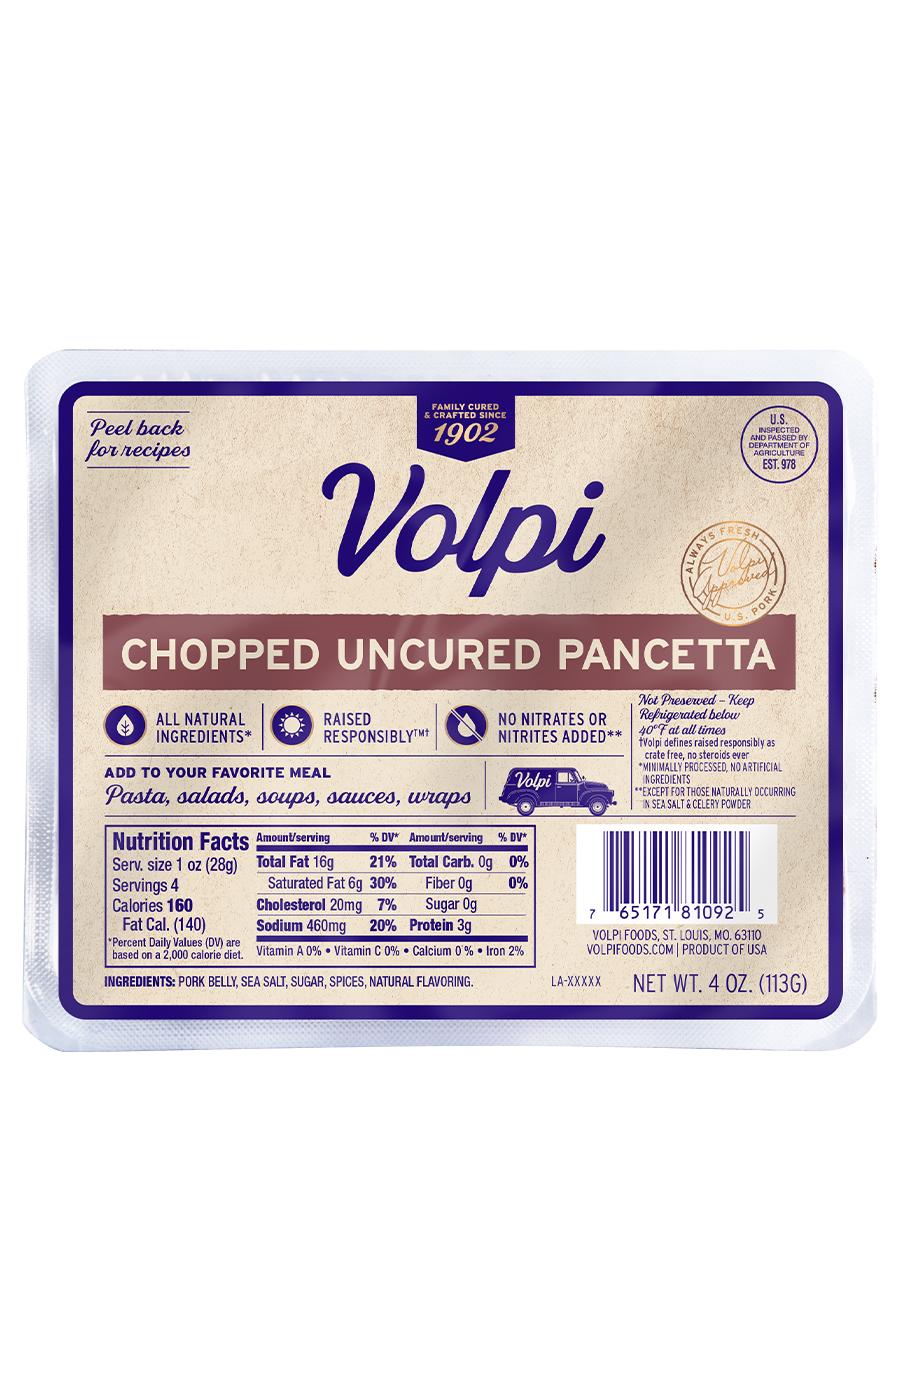 Volpi Chopped Uncured Pancetta; image 1 of 3